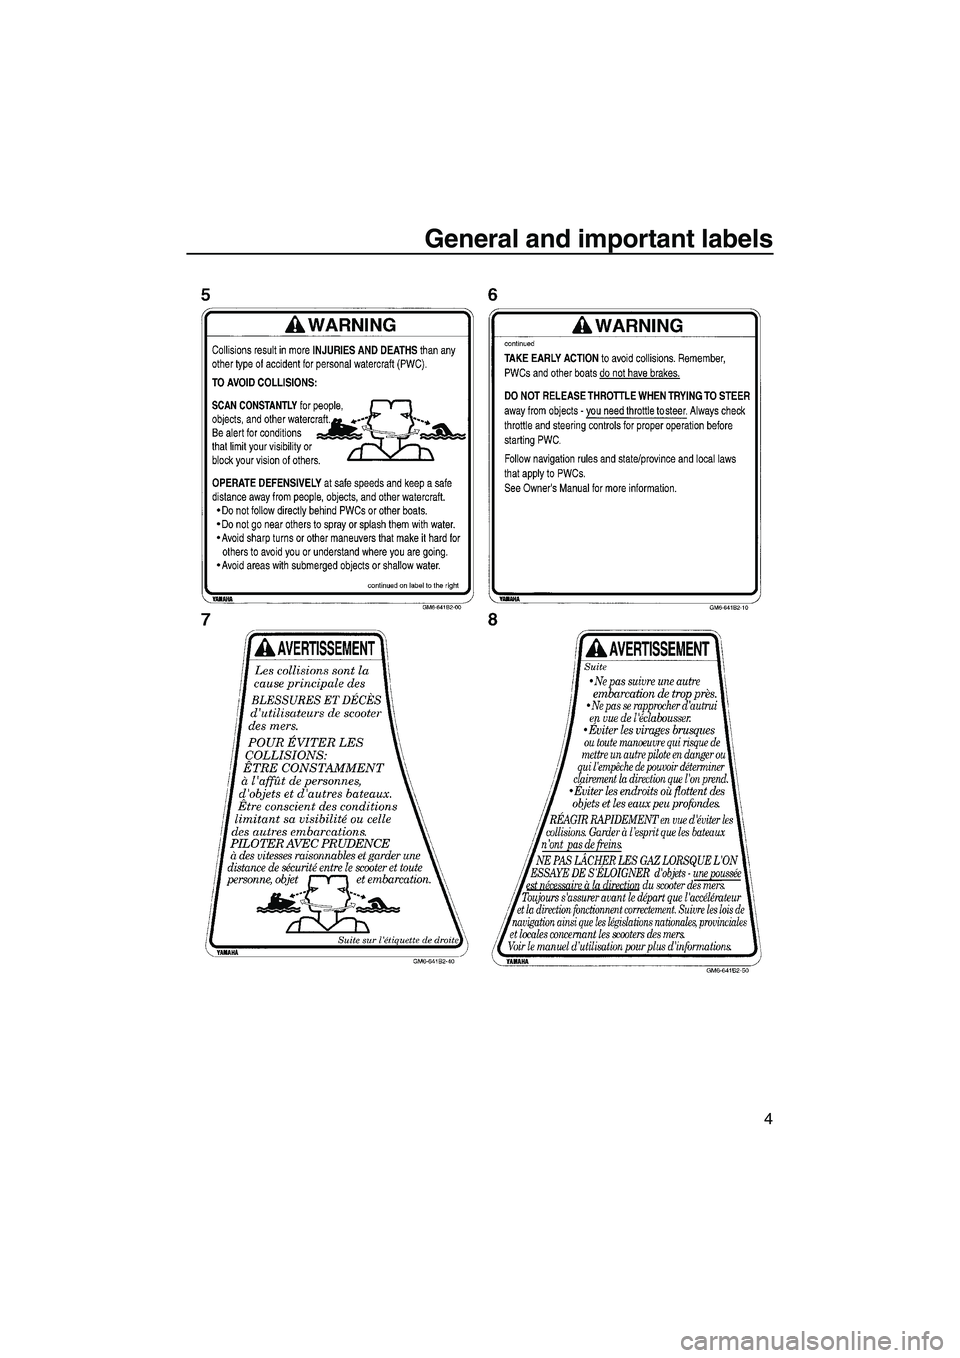 YAMAHA SUPERJET 2008 User Guide General and important labels
4
UF2F70E0.book  Page 4  Tuesday, April 17, 2007  9:56 AM 